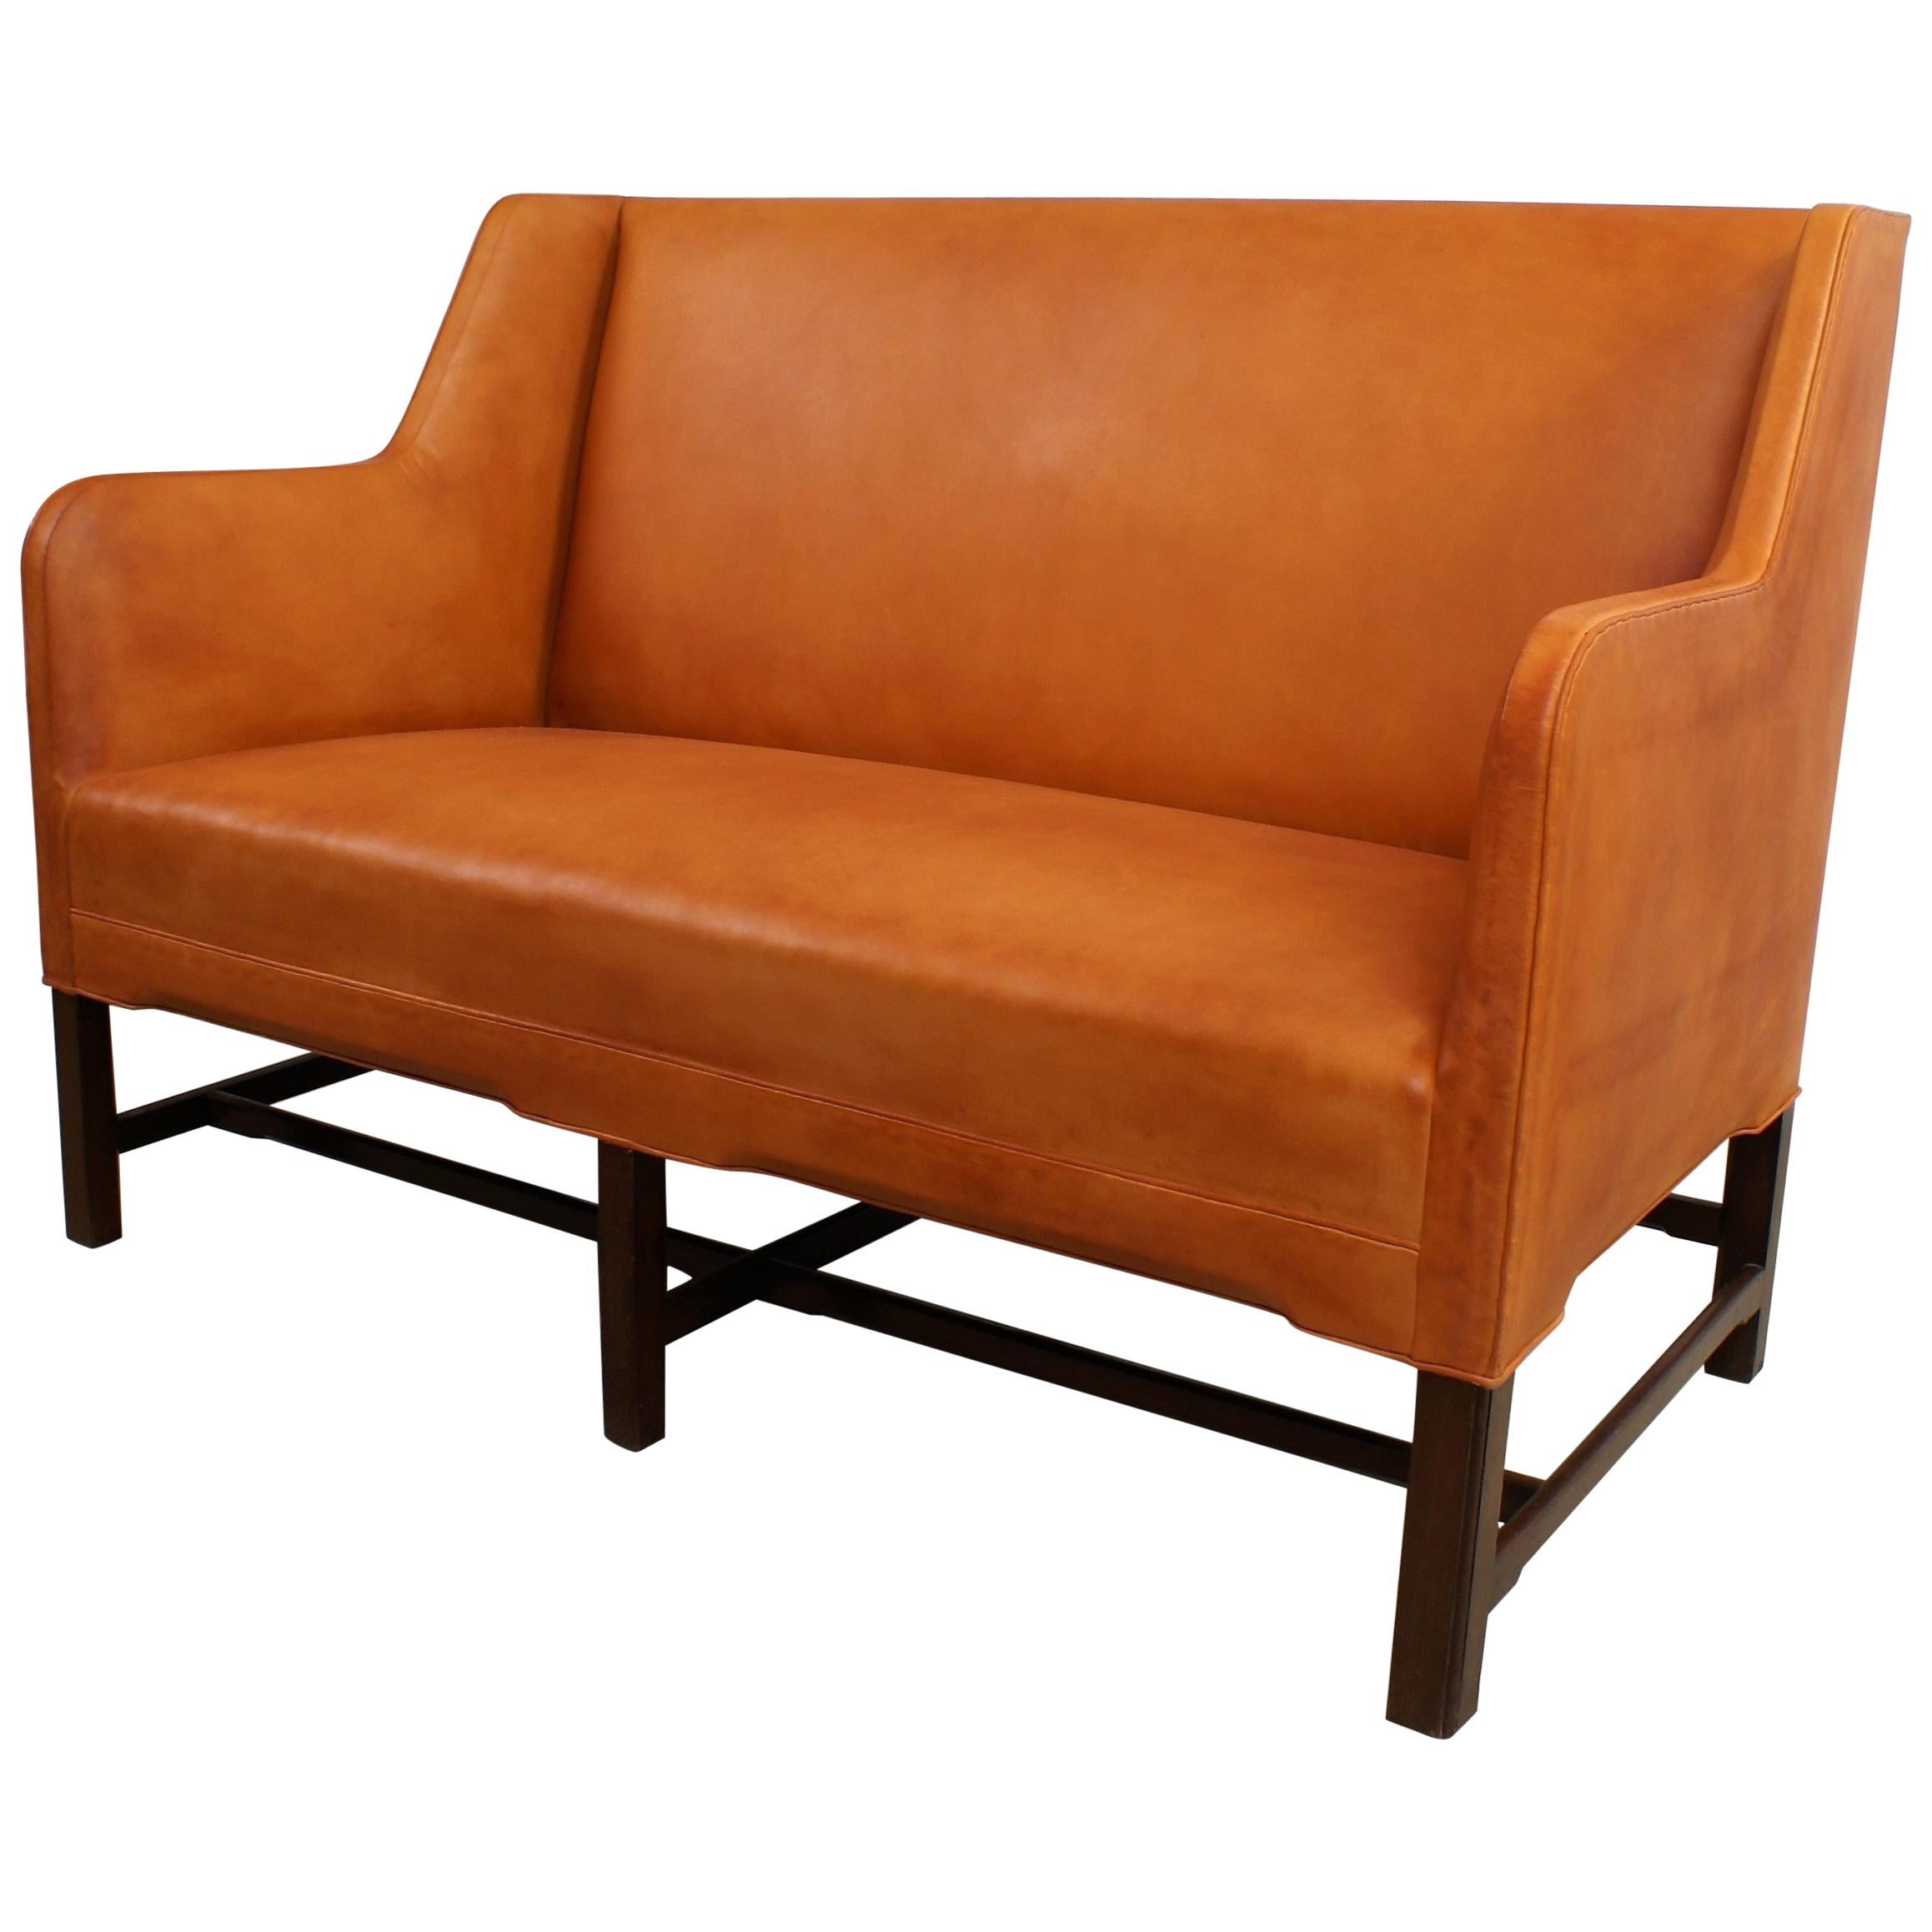 Kaare Klint Settee in Cuban Mahogany and Natural Leather, Model 5011, 1935